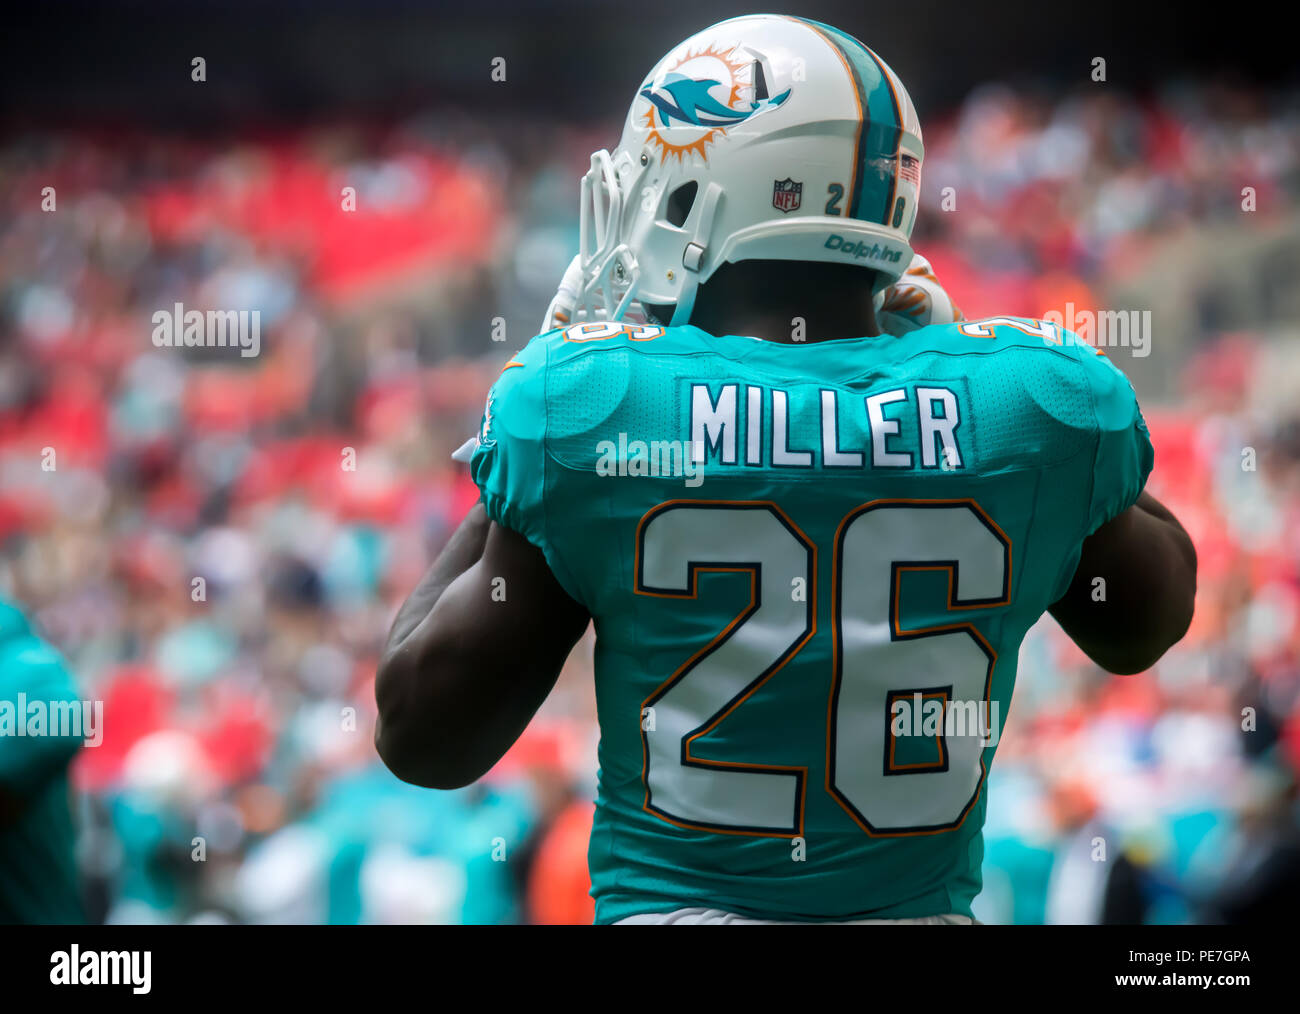 Lamar Miller (26), Miami Dolphins running back, straps on his ...